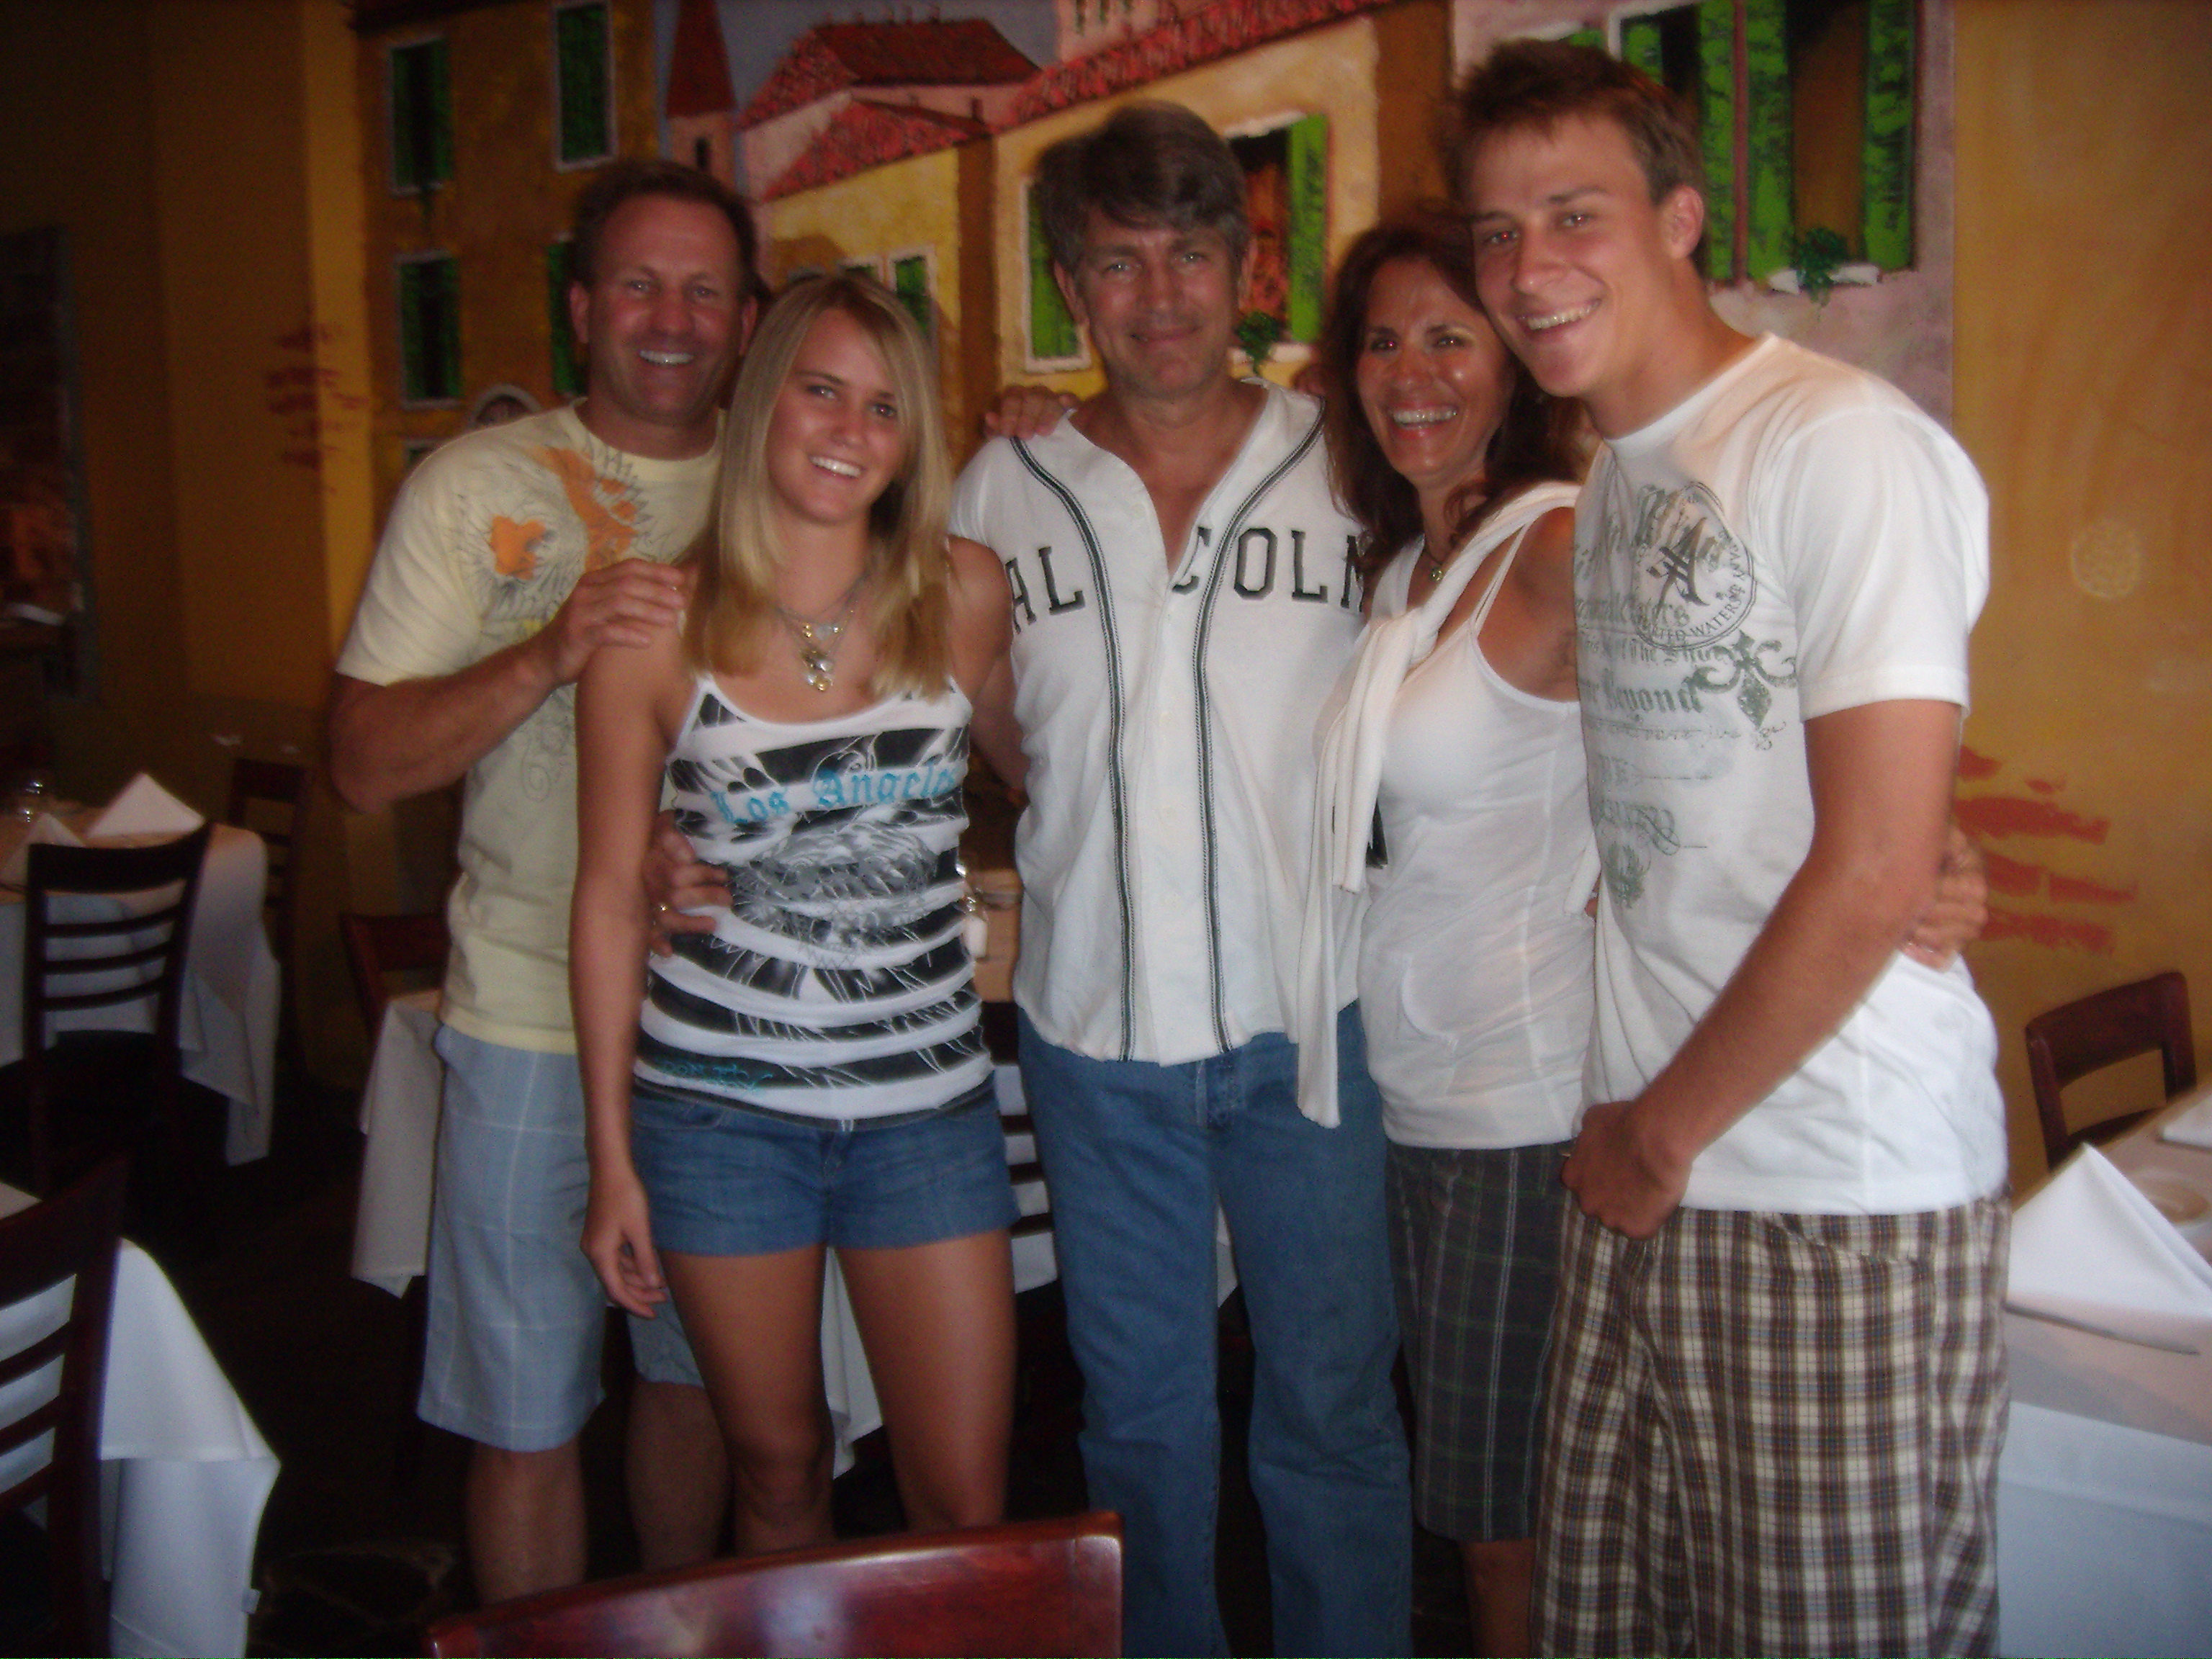 Ted, his son Teddy, daughter Samantha and their mother Angela with Eric Roberts